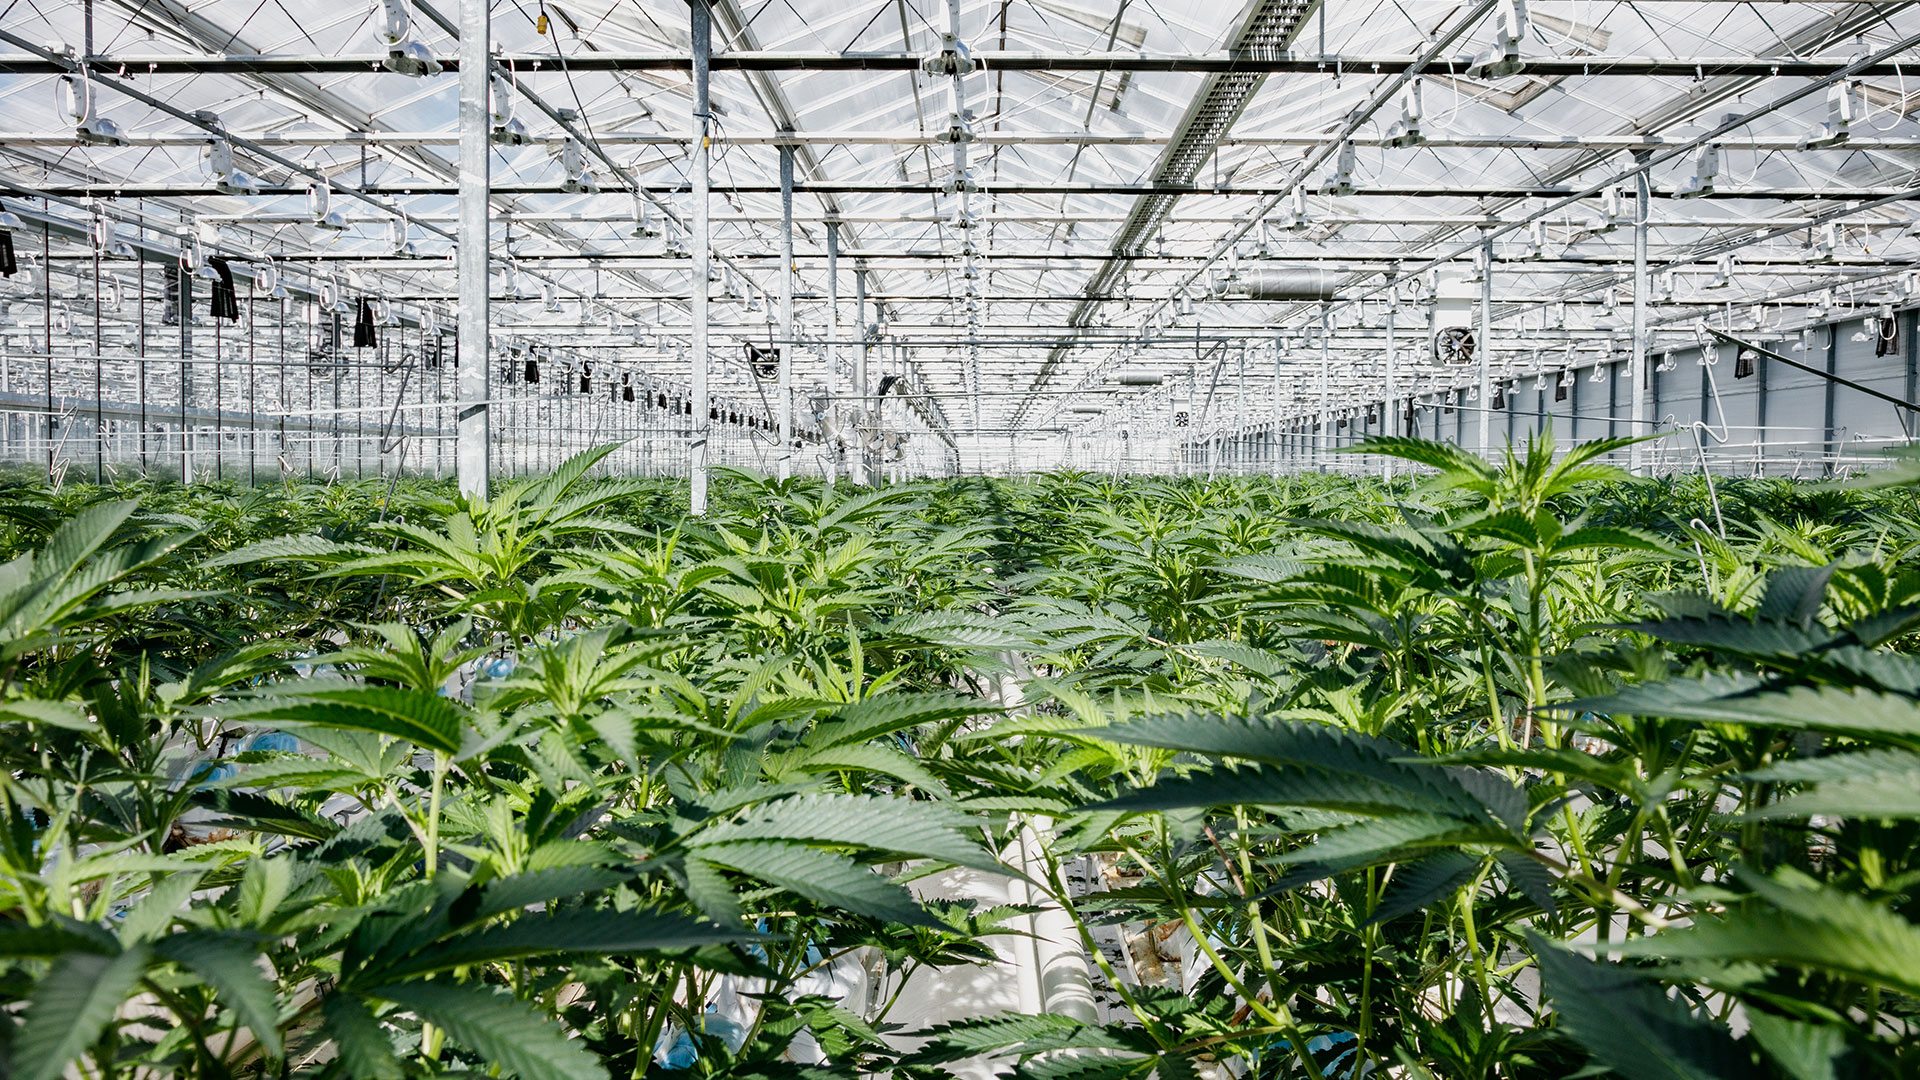 Pure Sunfarms Co-Founds Cannabis Cultivators of B.C. With Fellow Industry Leaders to Foster Sustainable, Responsible Cannabis Industry in the Province